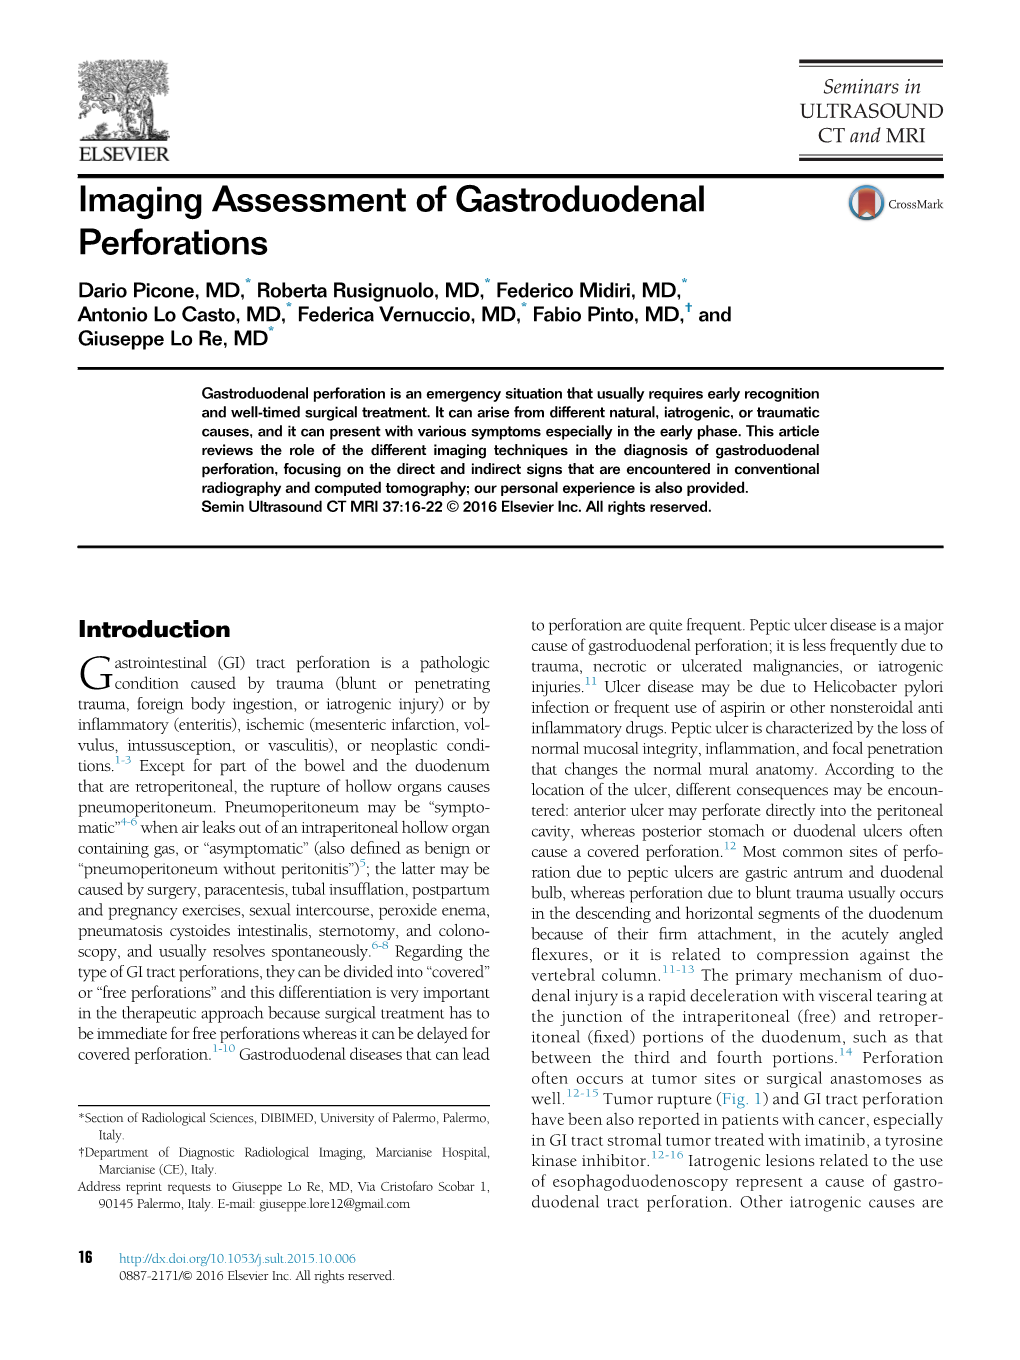 Imaging Assessment of Gastroduodenal Perforations